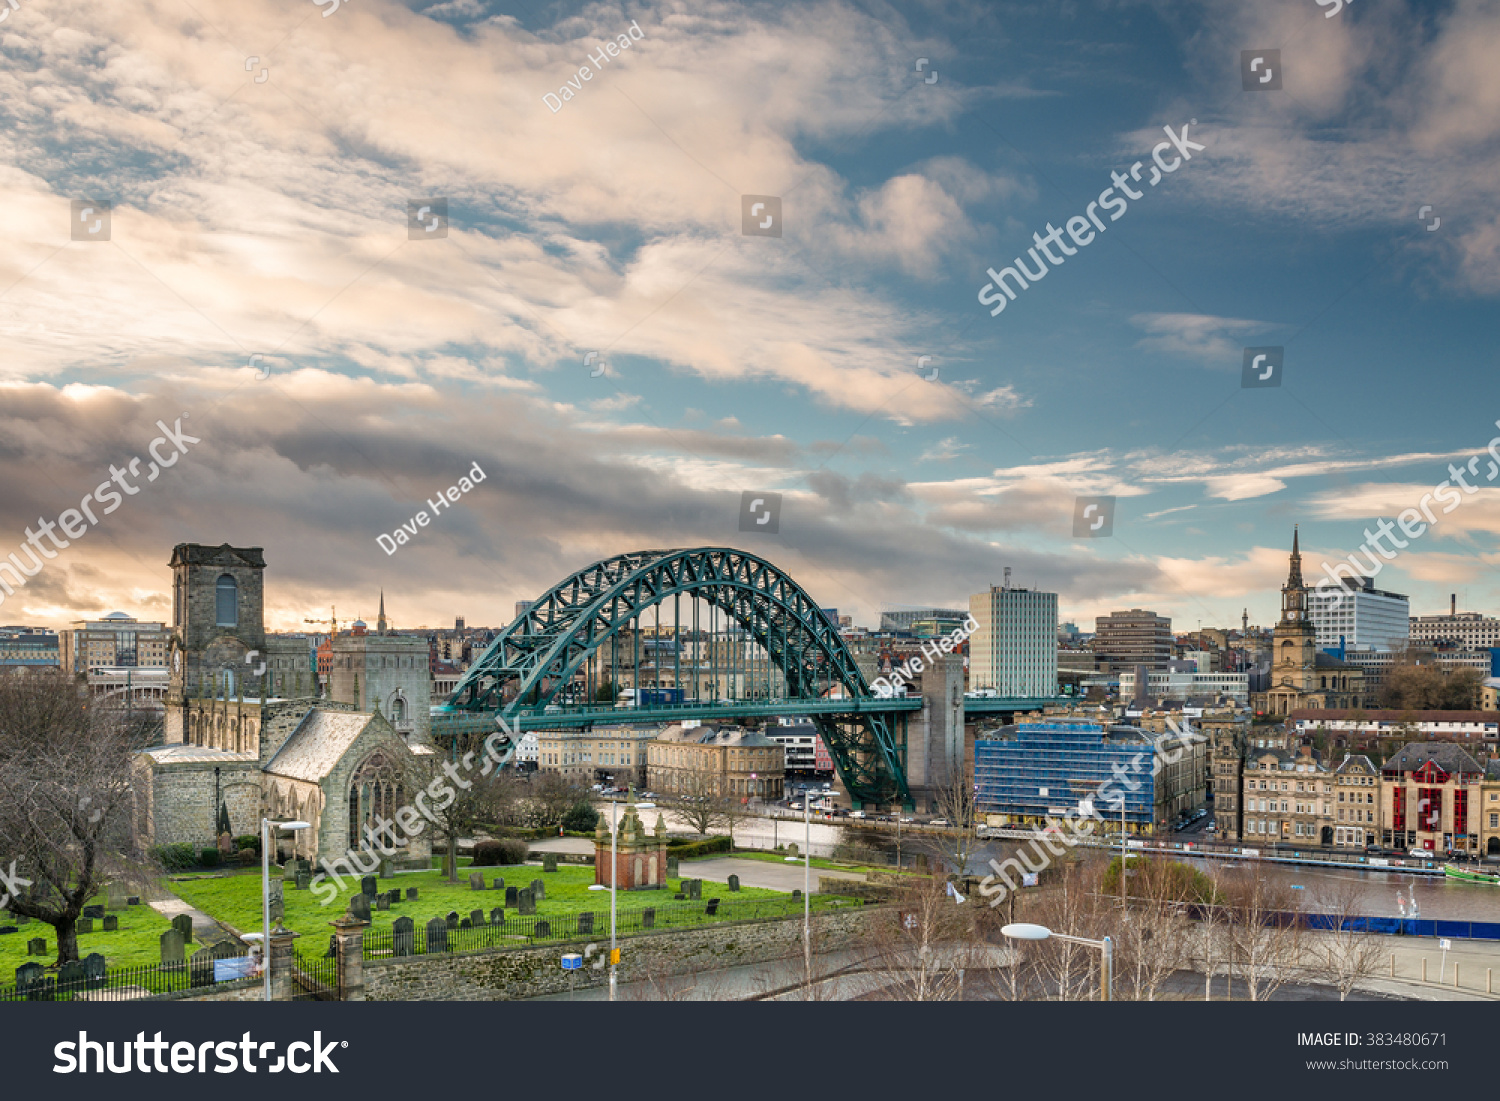 Newcastle Skyline / Newcastle skyline showing the iconic Tyne Bridge. St Mary's church to the left and All Saints Church on the right #383480671